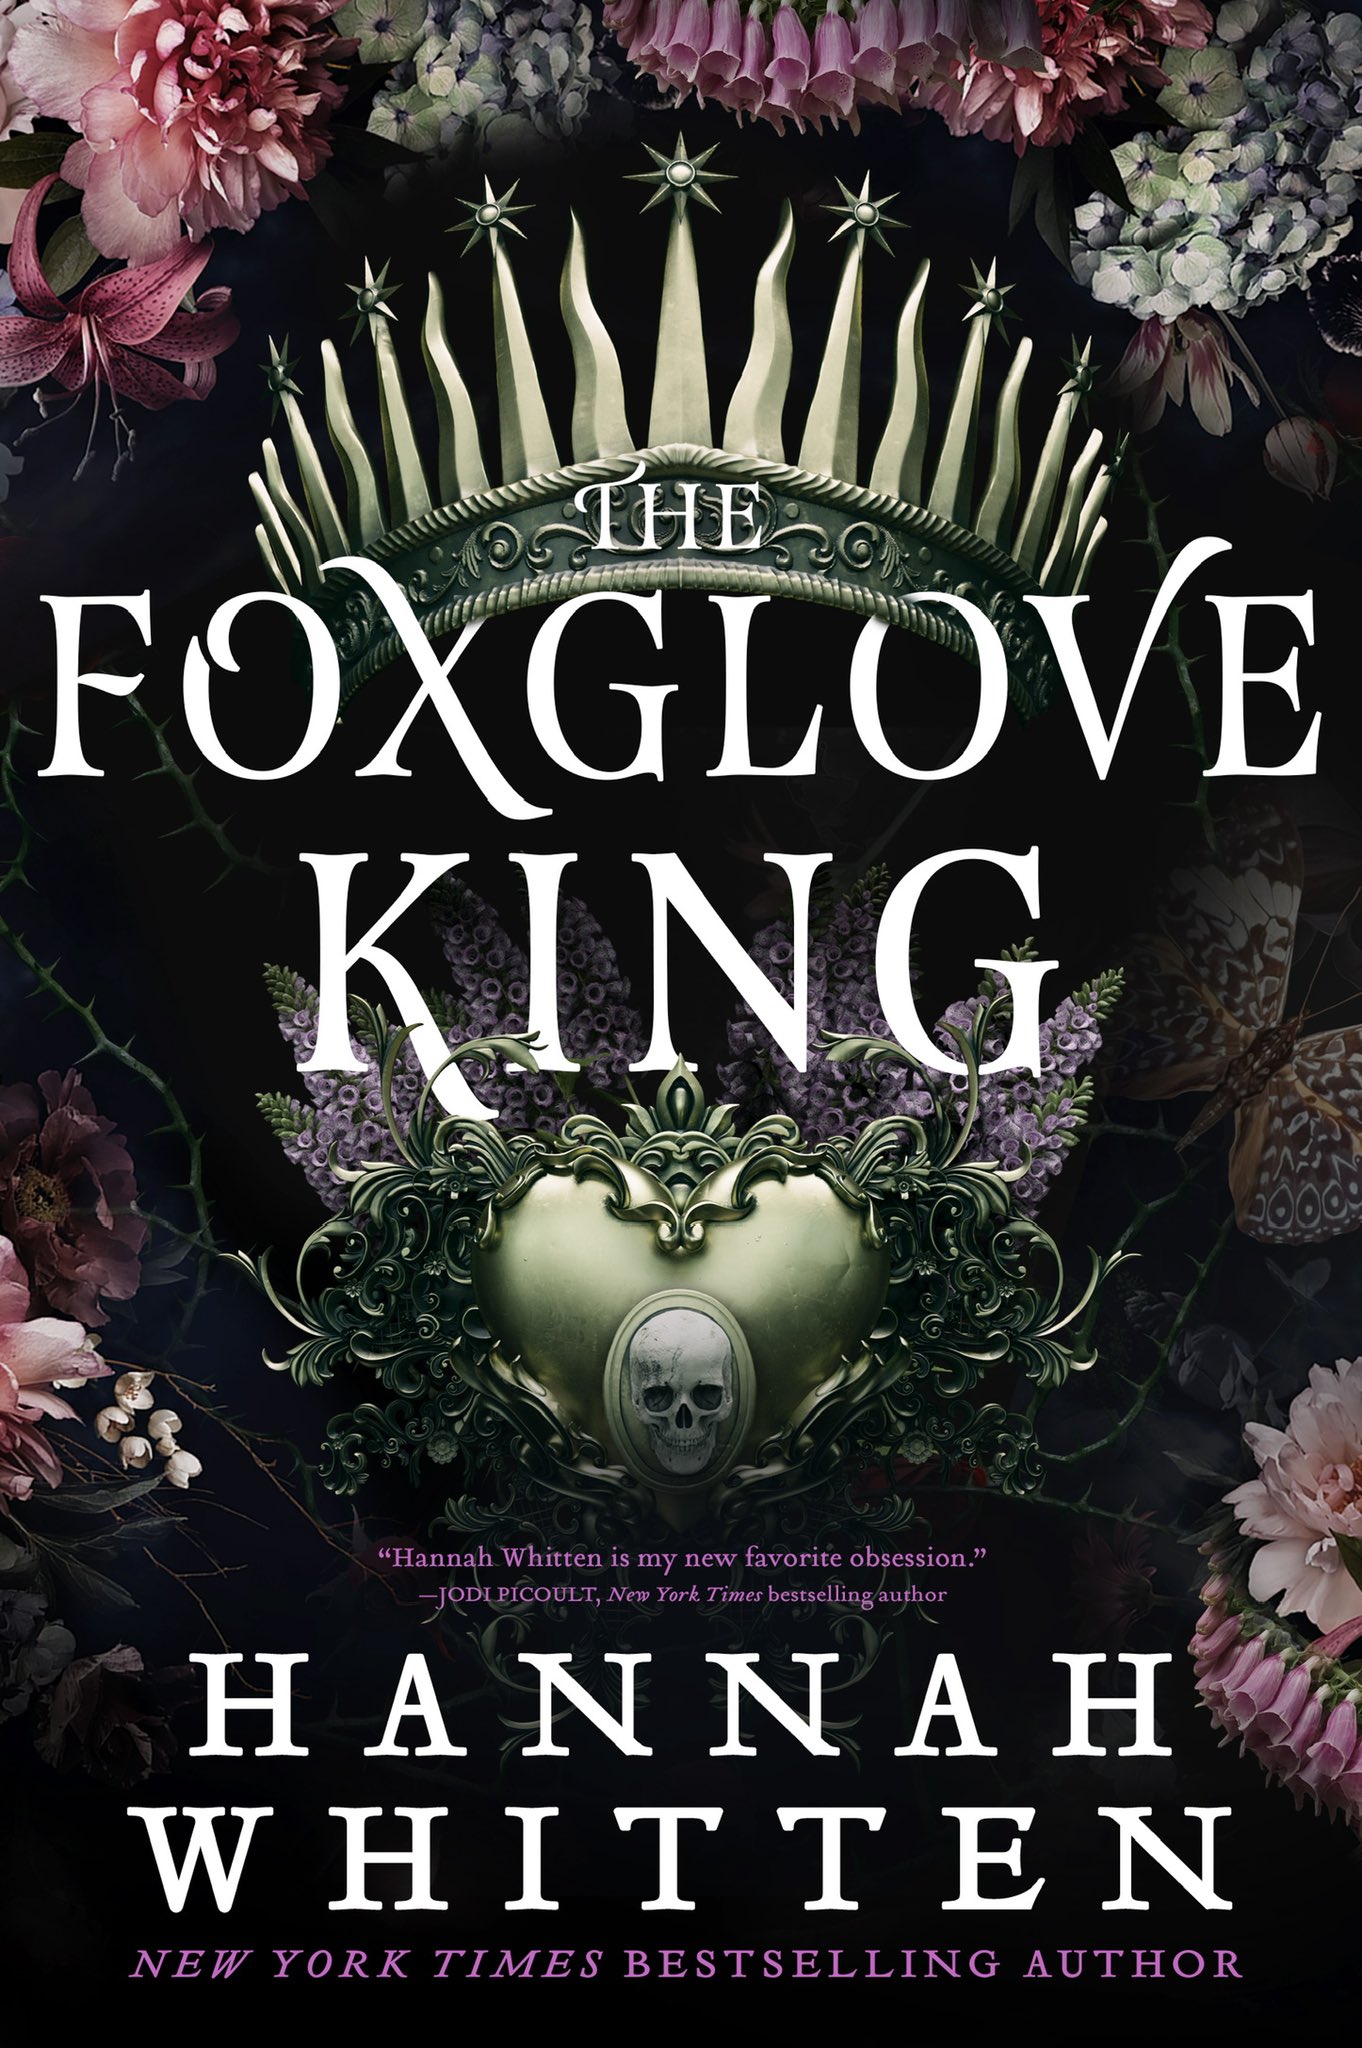 The Foxglove King by Hannah Whitten PDF Download